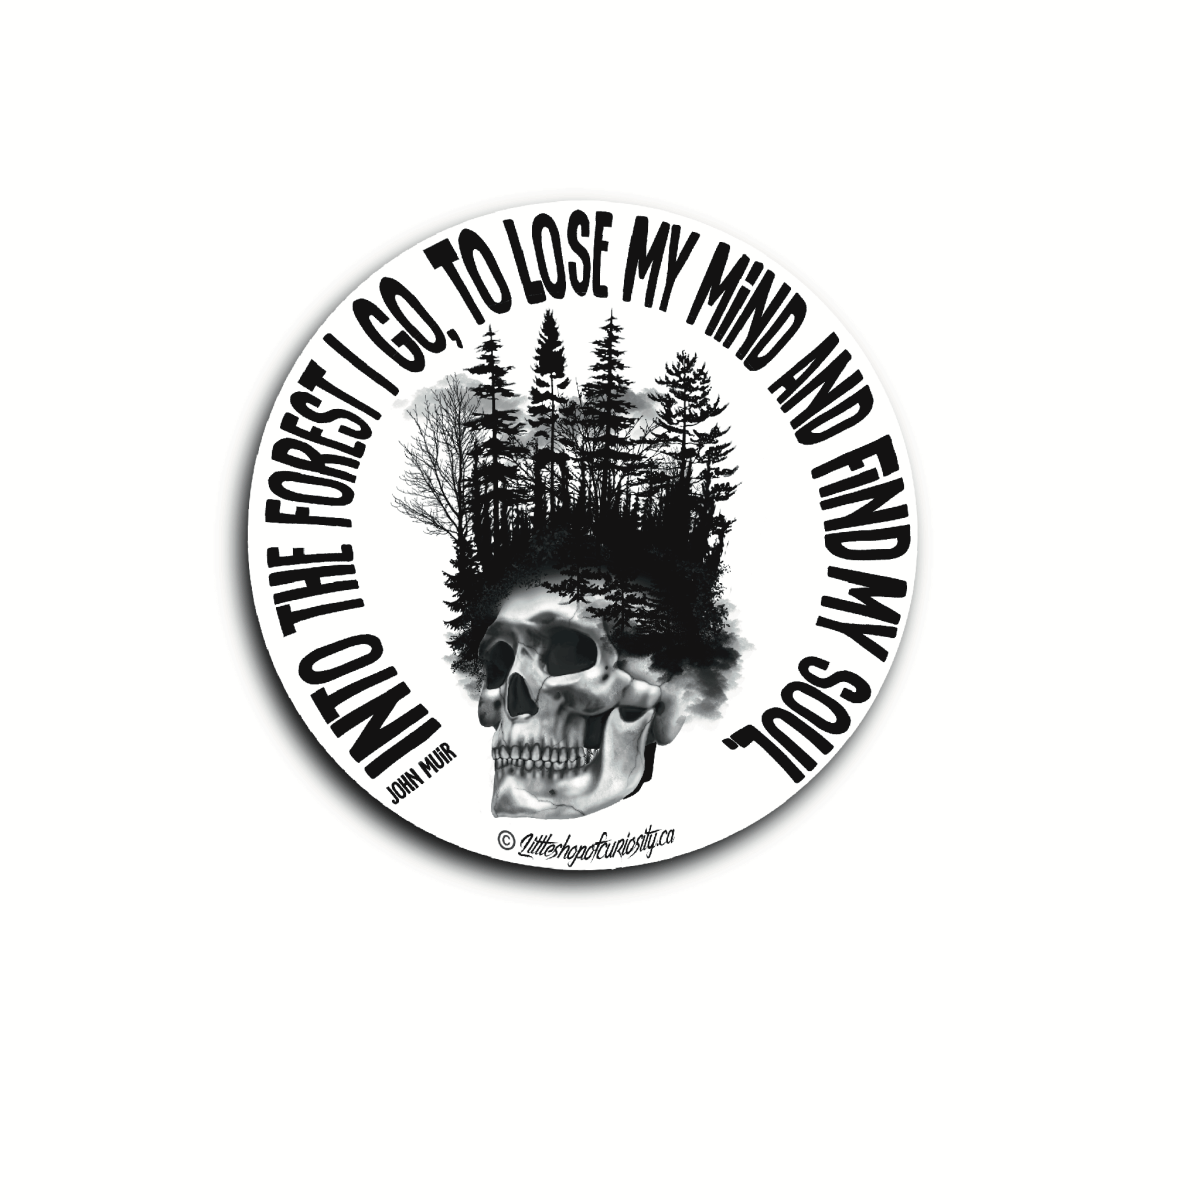 Into The Forest I Go Sticker - Black & White Sticker - Little Shop of Curiosity